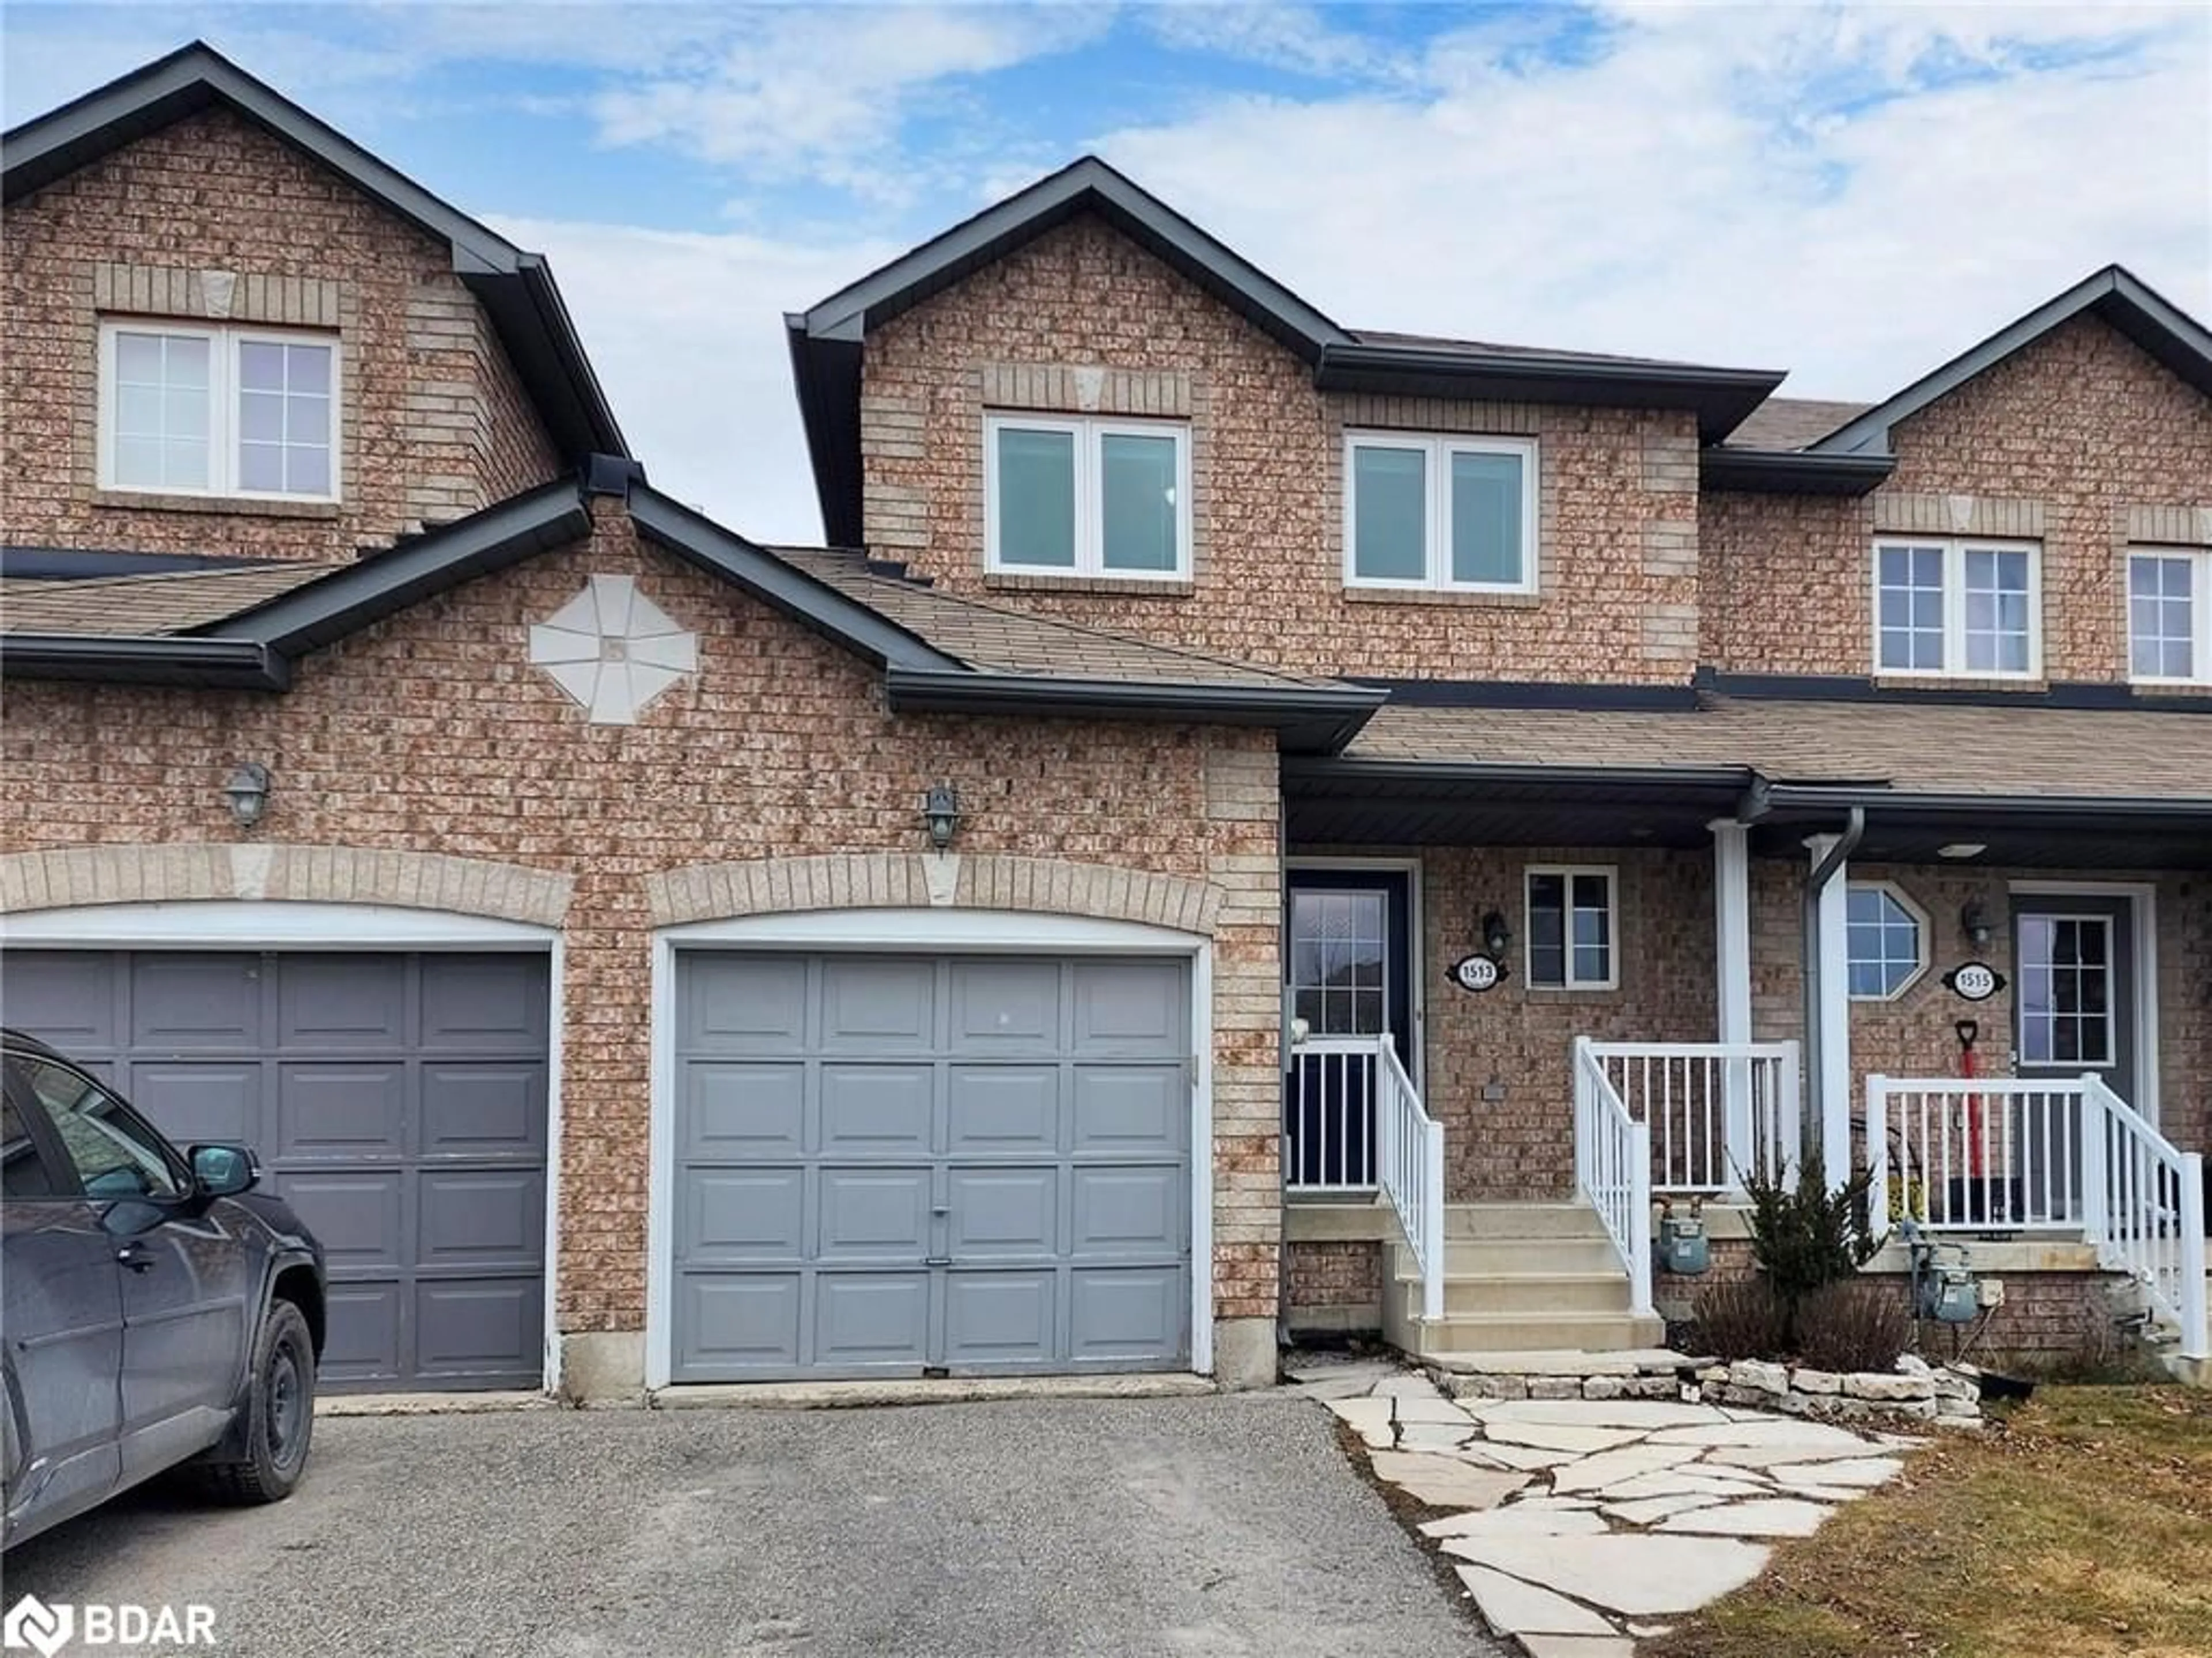 Home with brick exterior material for 1513 Rankin Way, Innisfil Ontario L9S 0C6